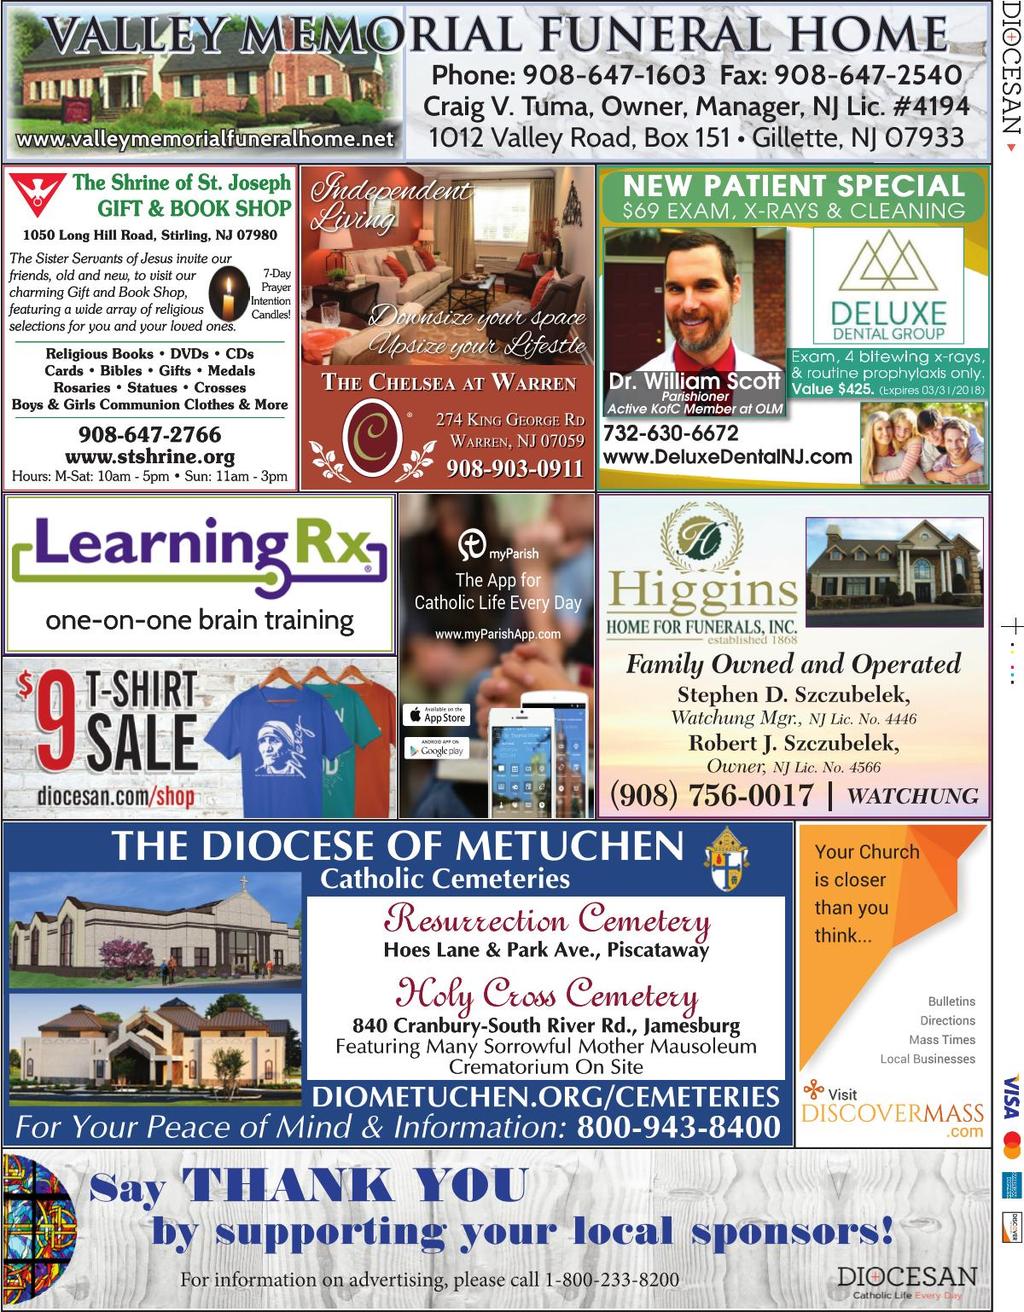 View Our Parish Supporters at www.discovermass.